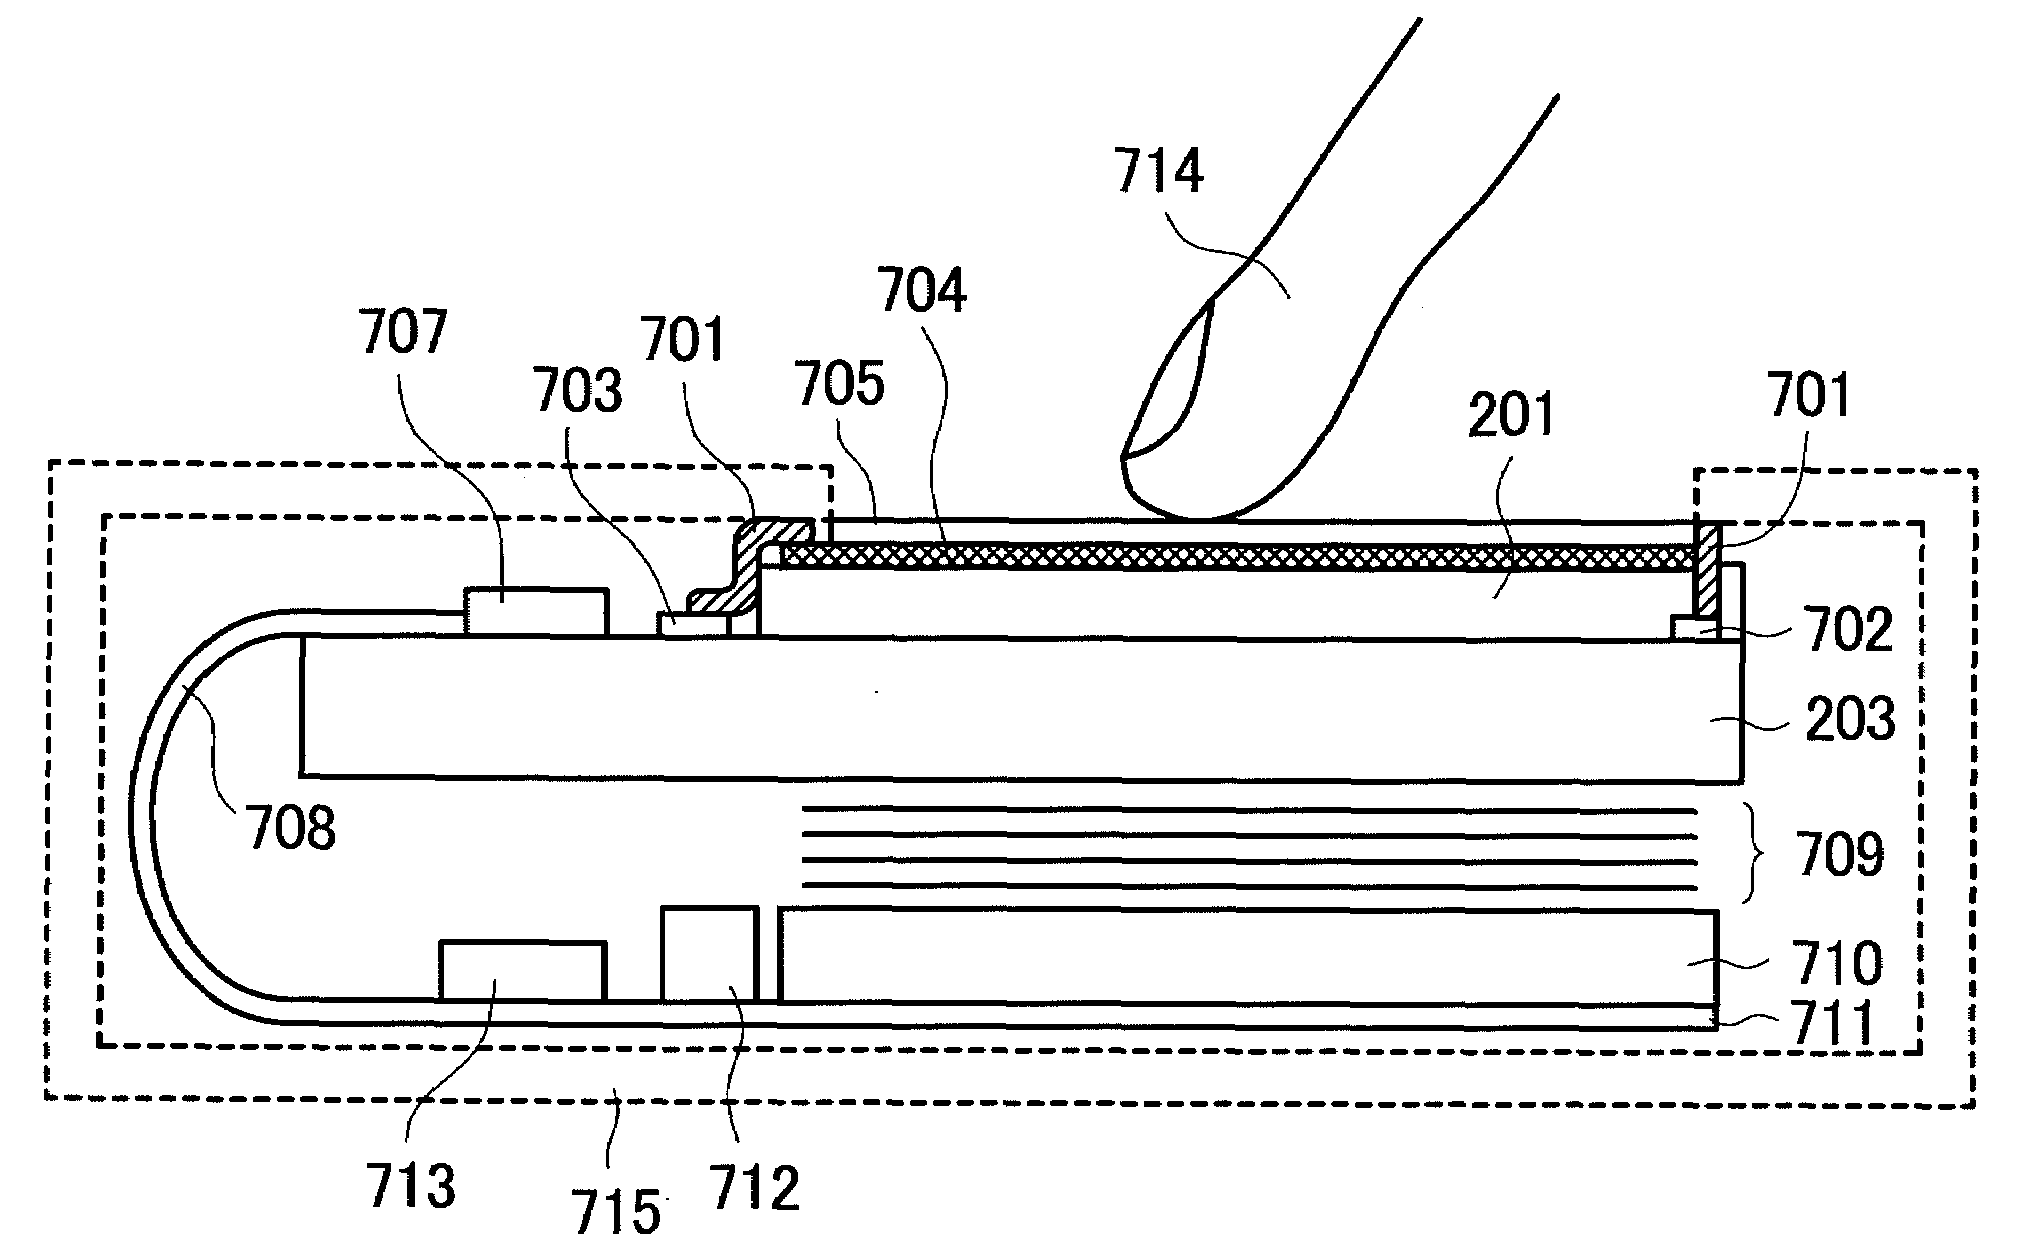 Liquid crystal dispaly device with touch screen